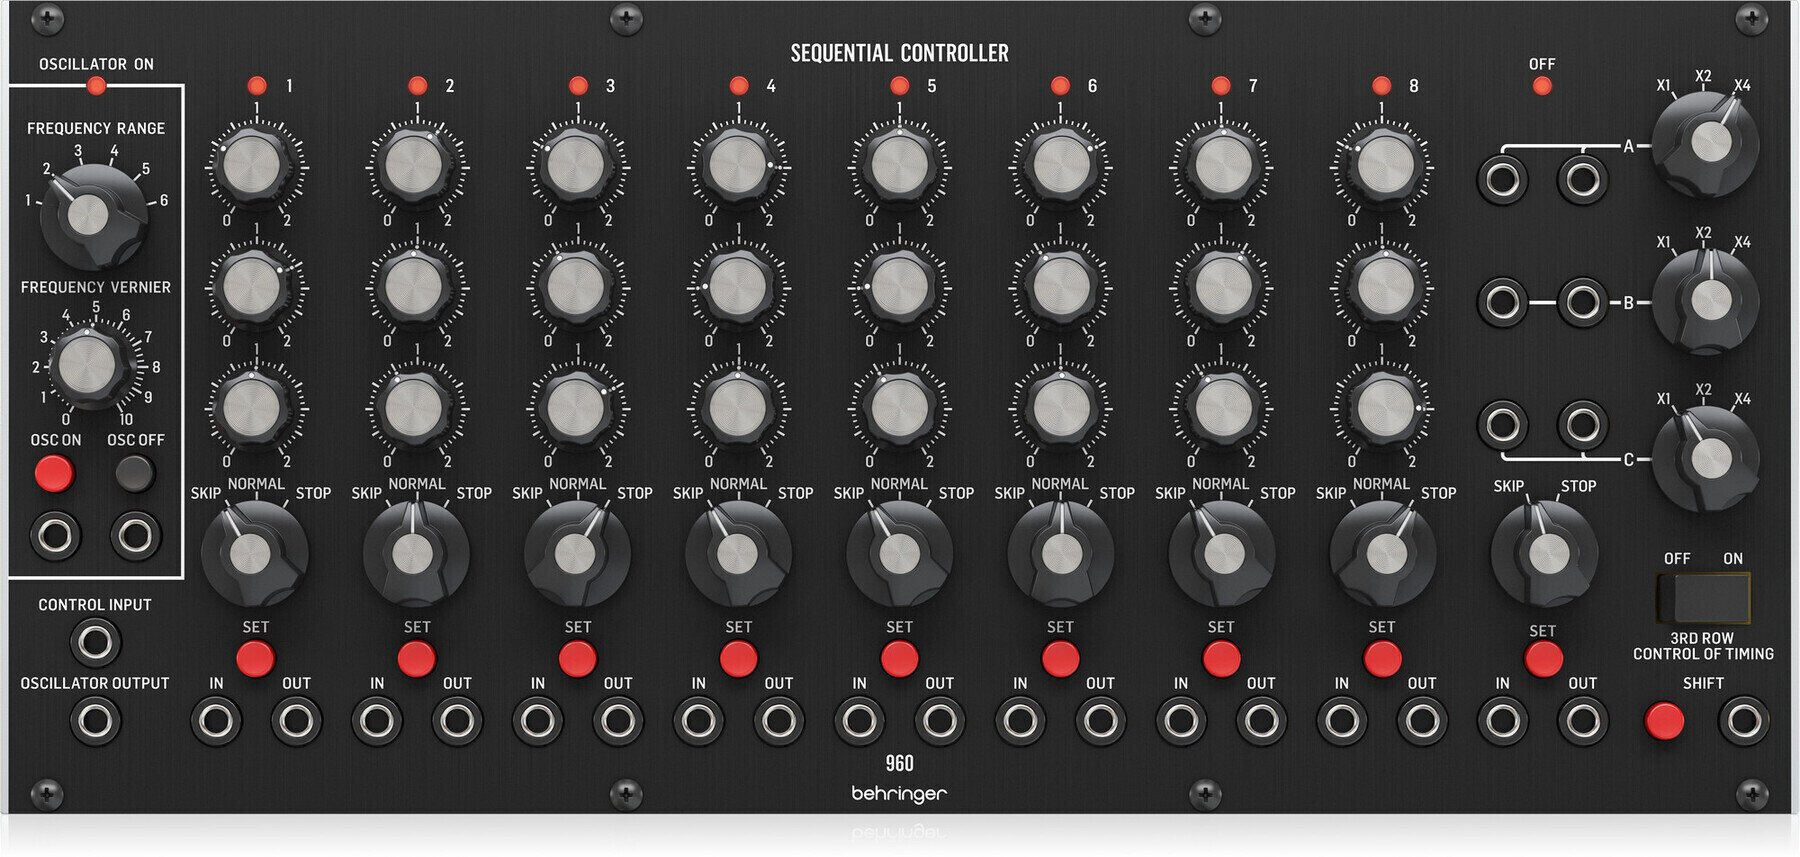 Modulair systeem Behringer 960 Sequential Controller